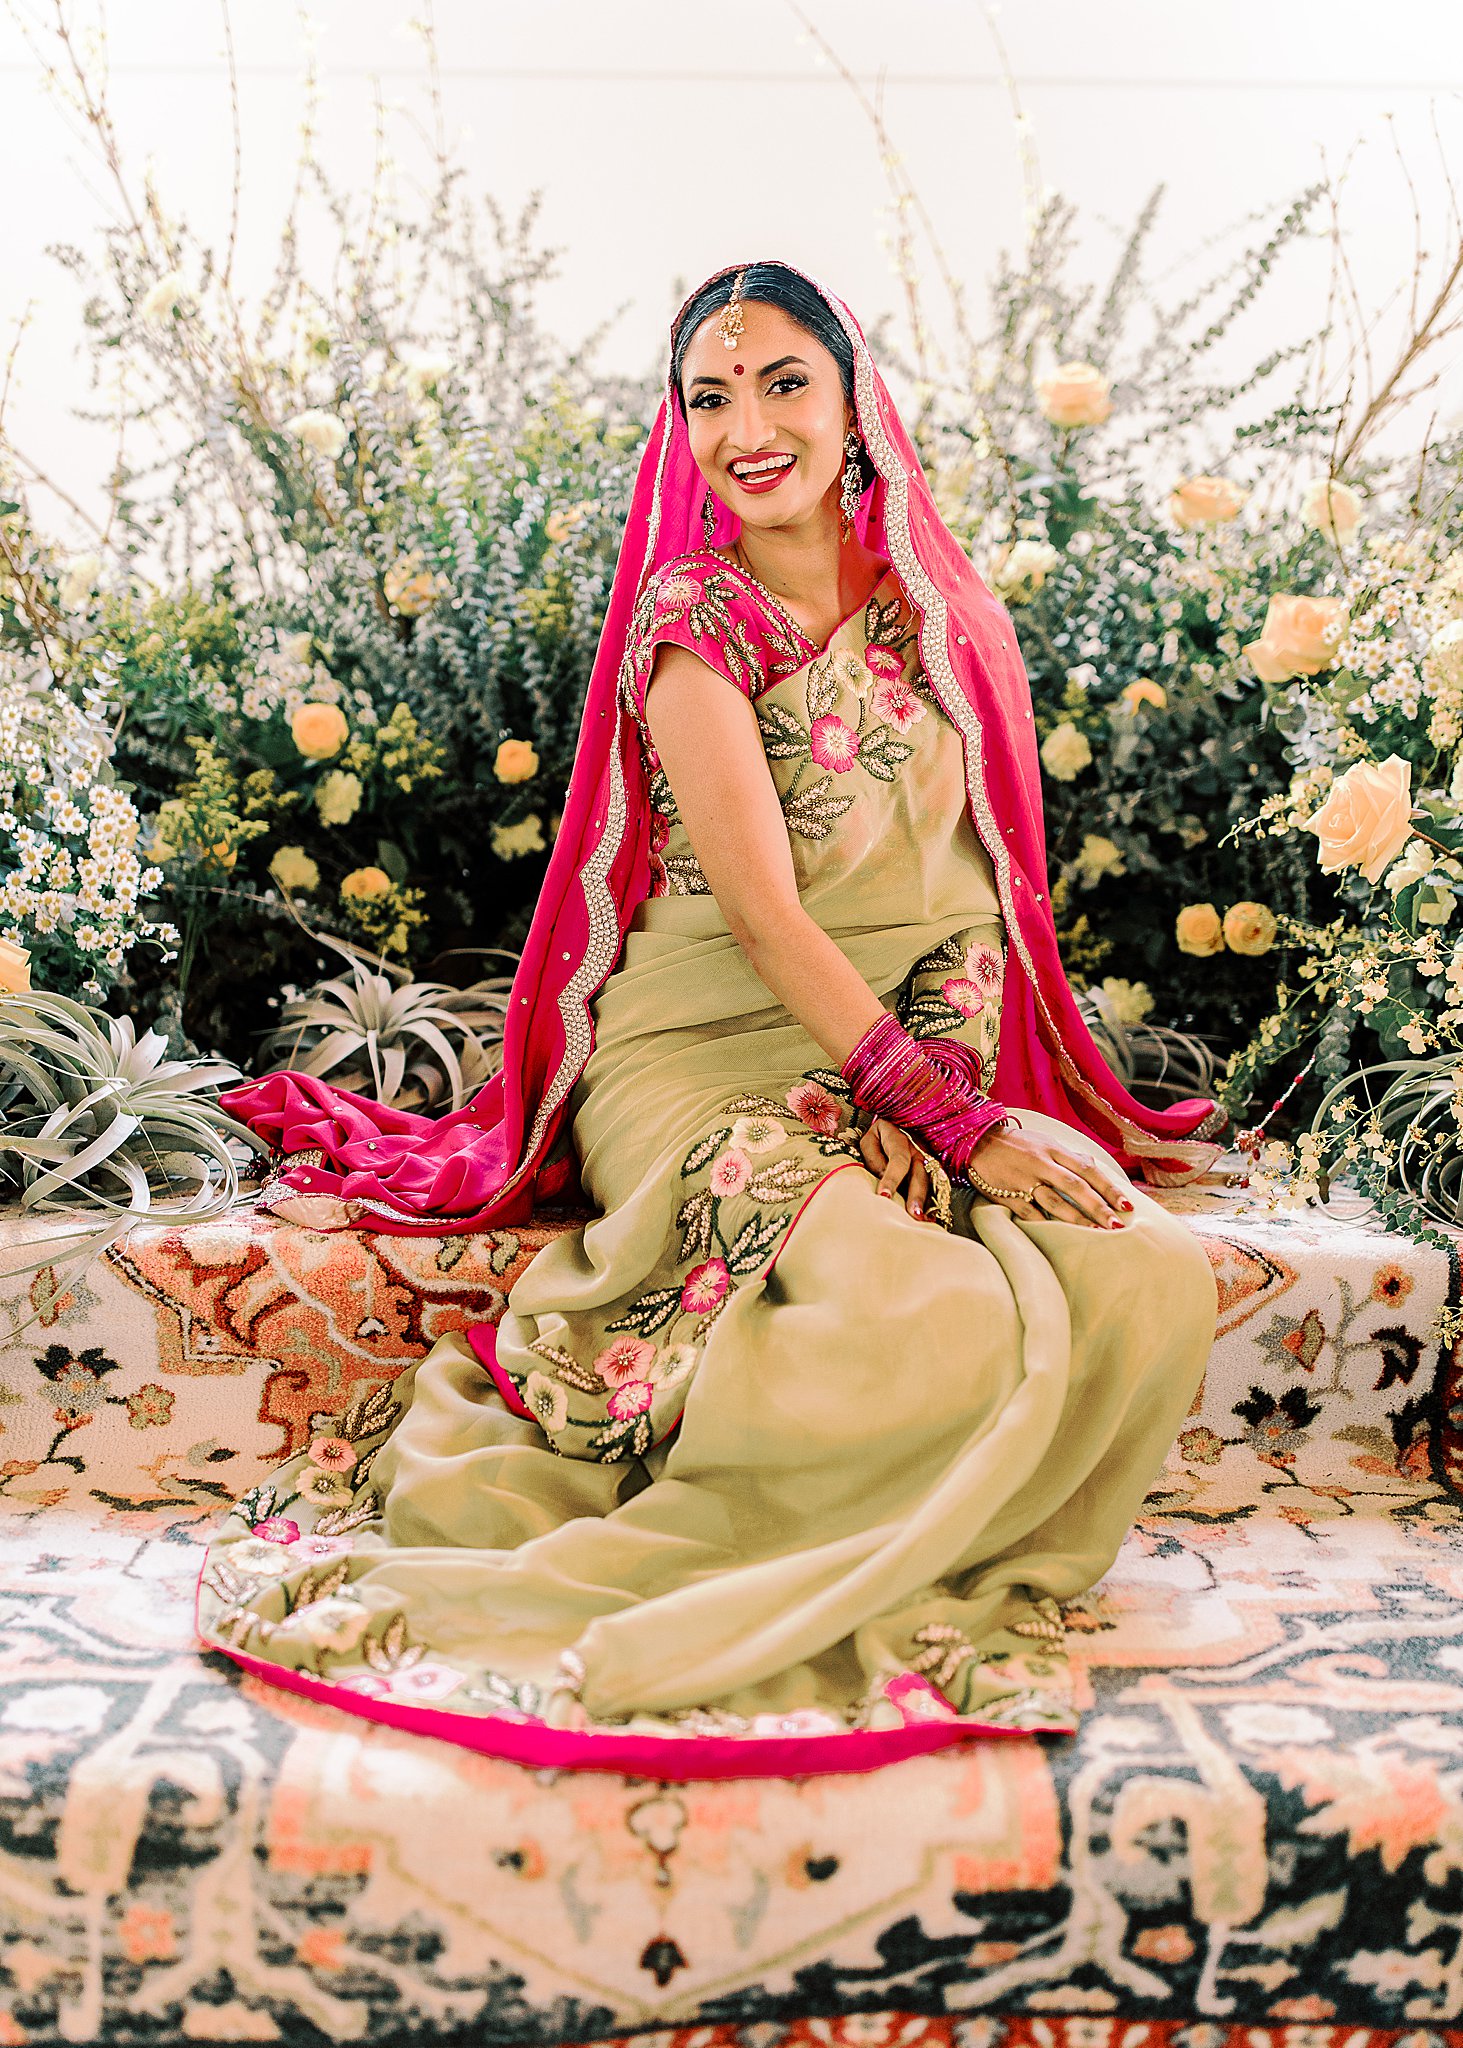 Gorgeous Indian bride in pink and gold lehenga surrounded by yellow roses